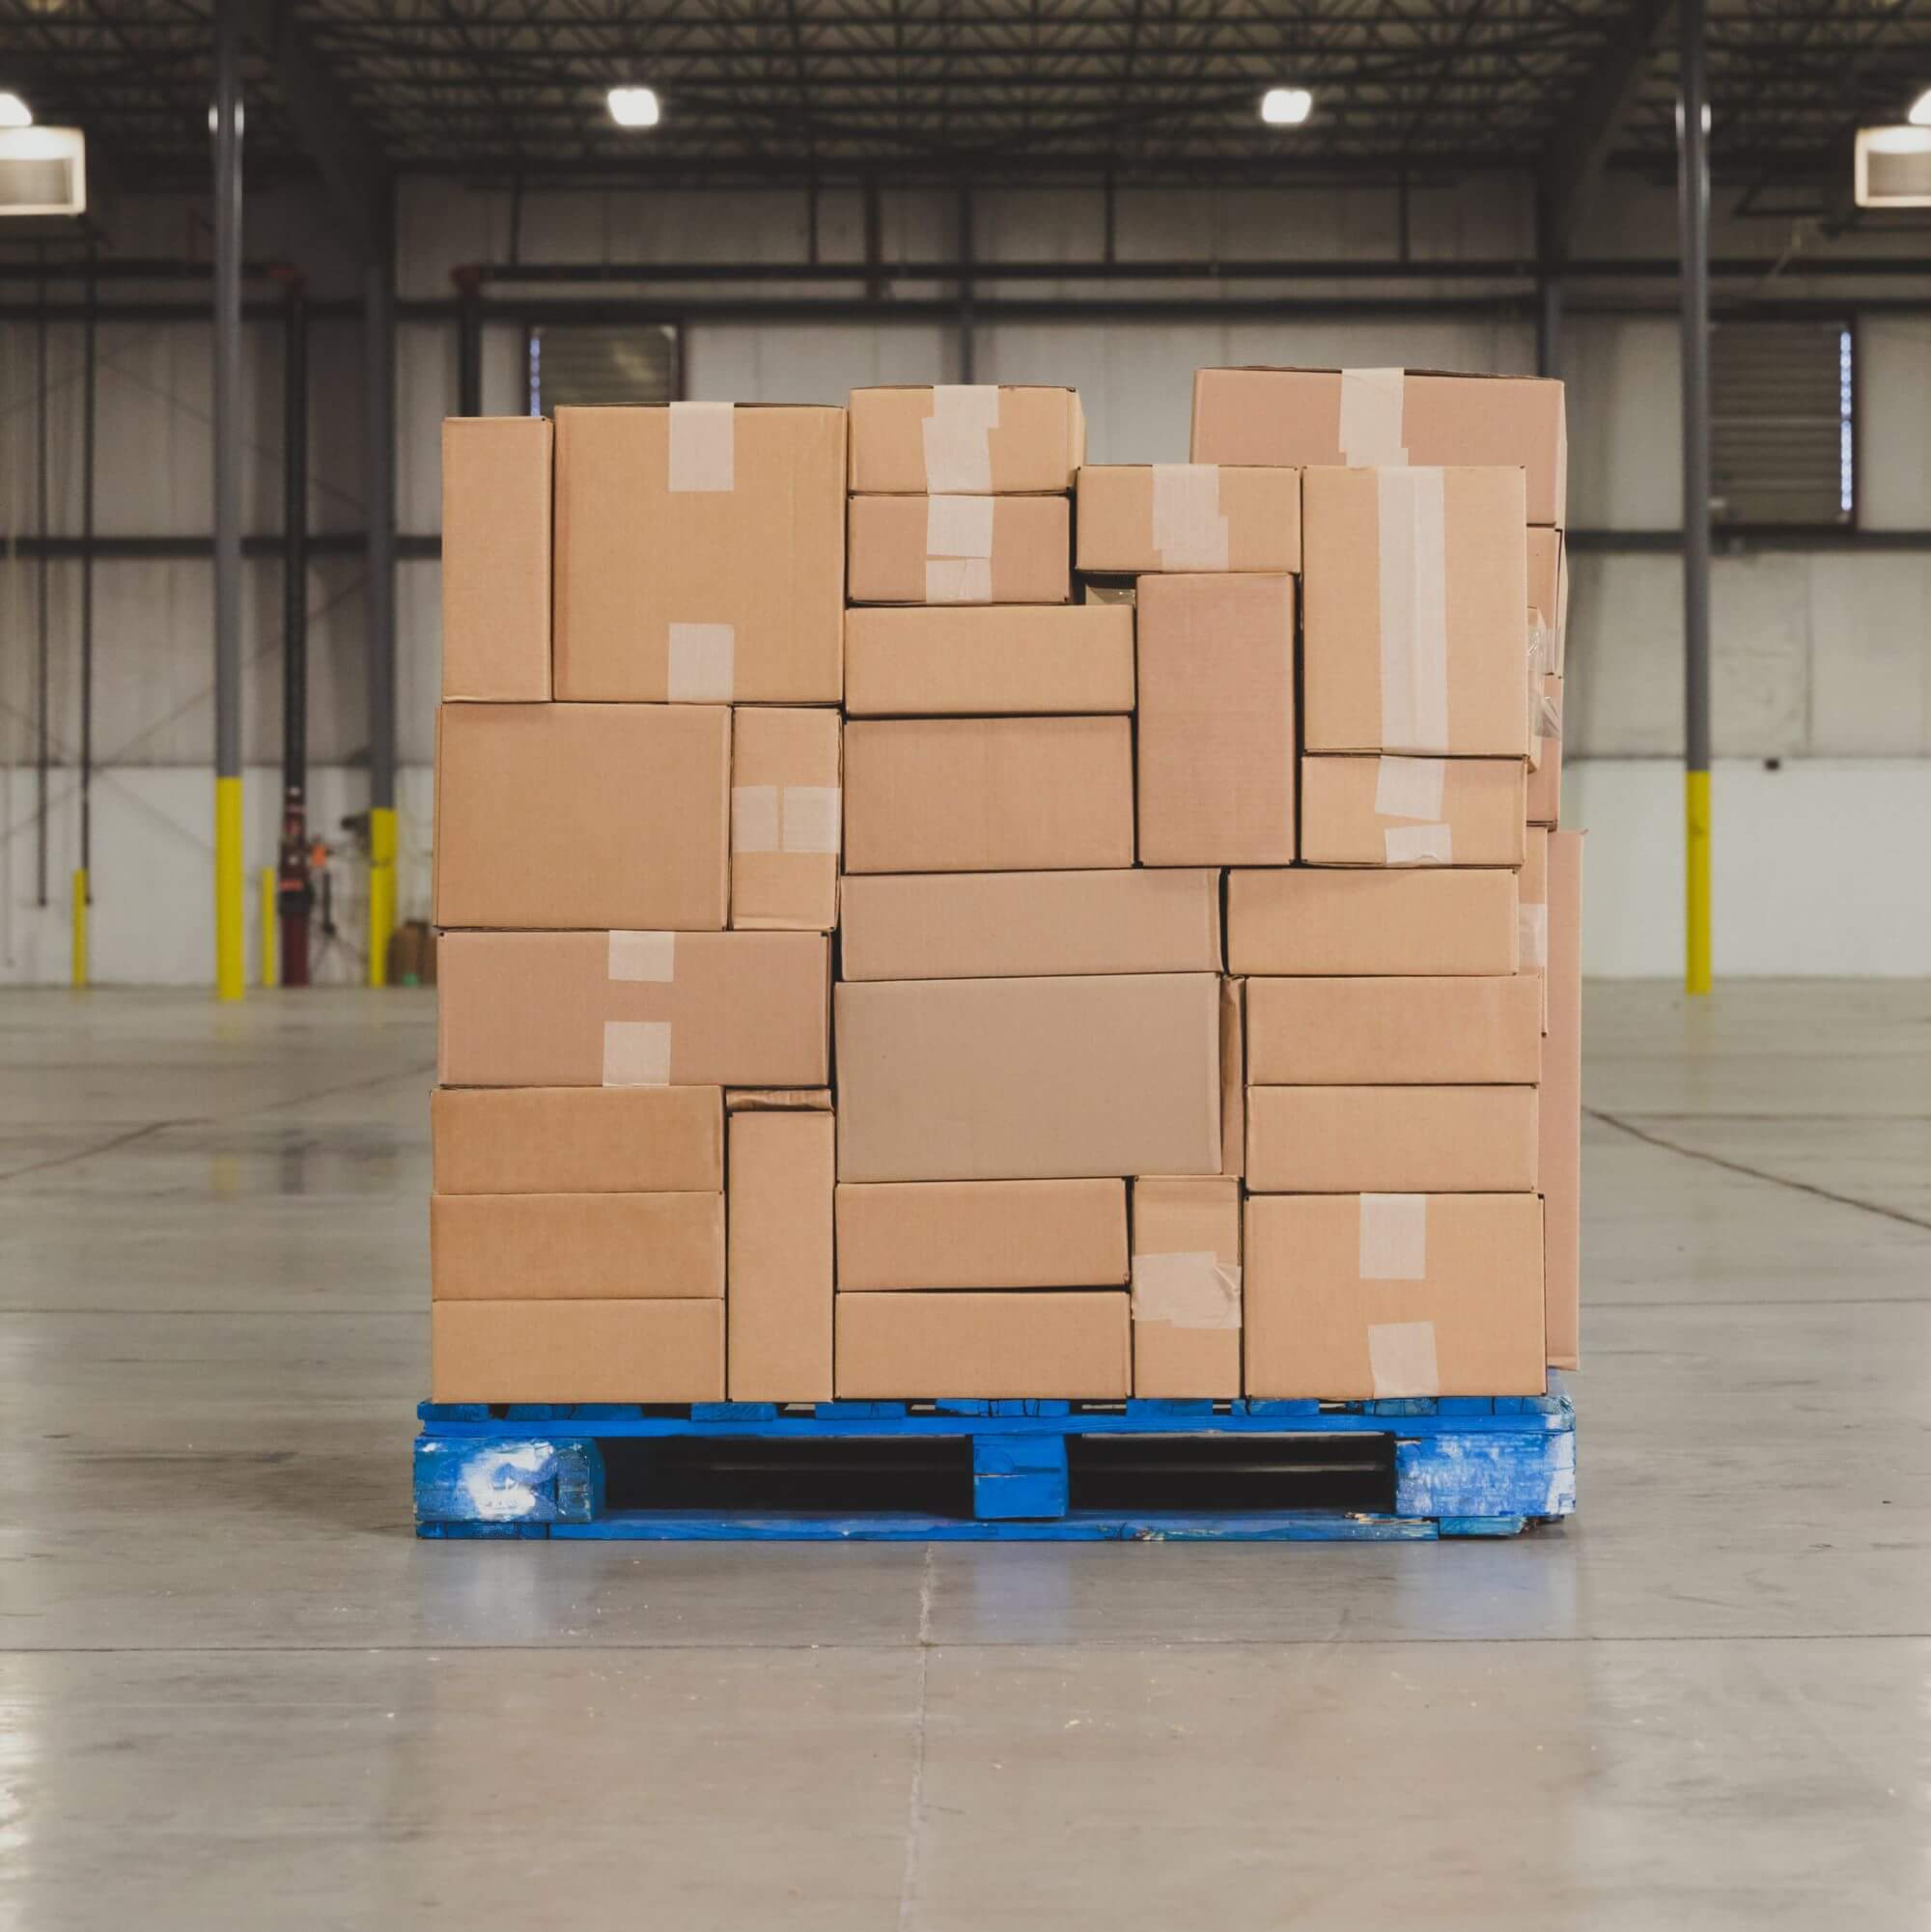 New products in cardboard boxes stored in a warehouse